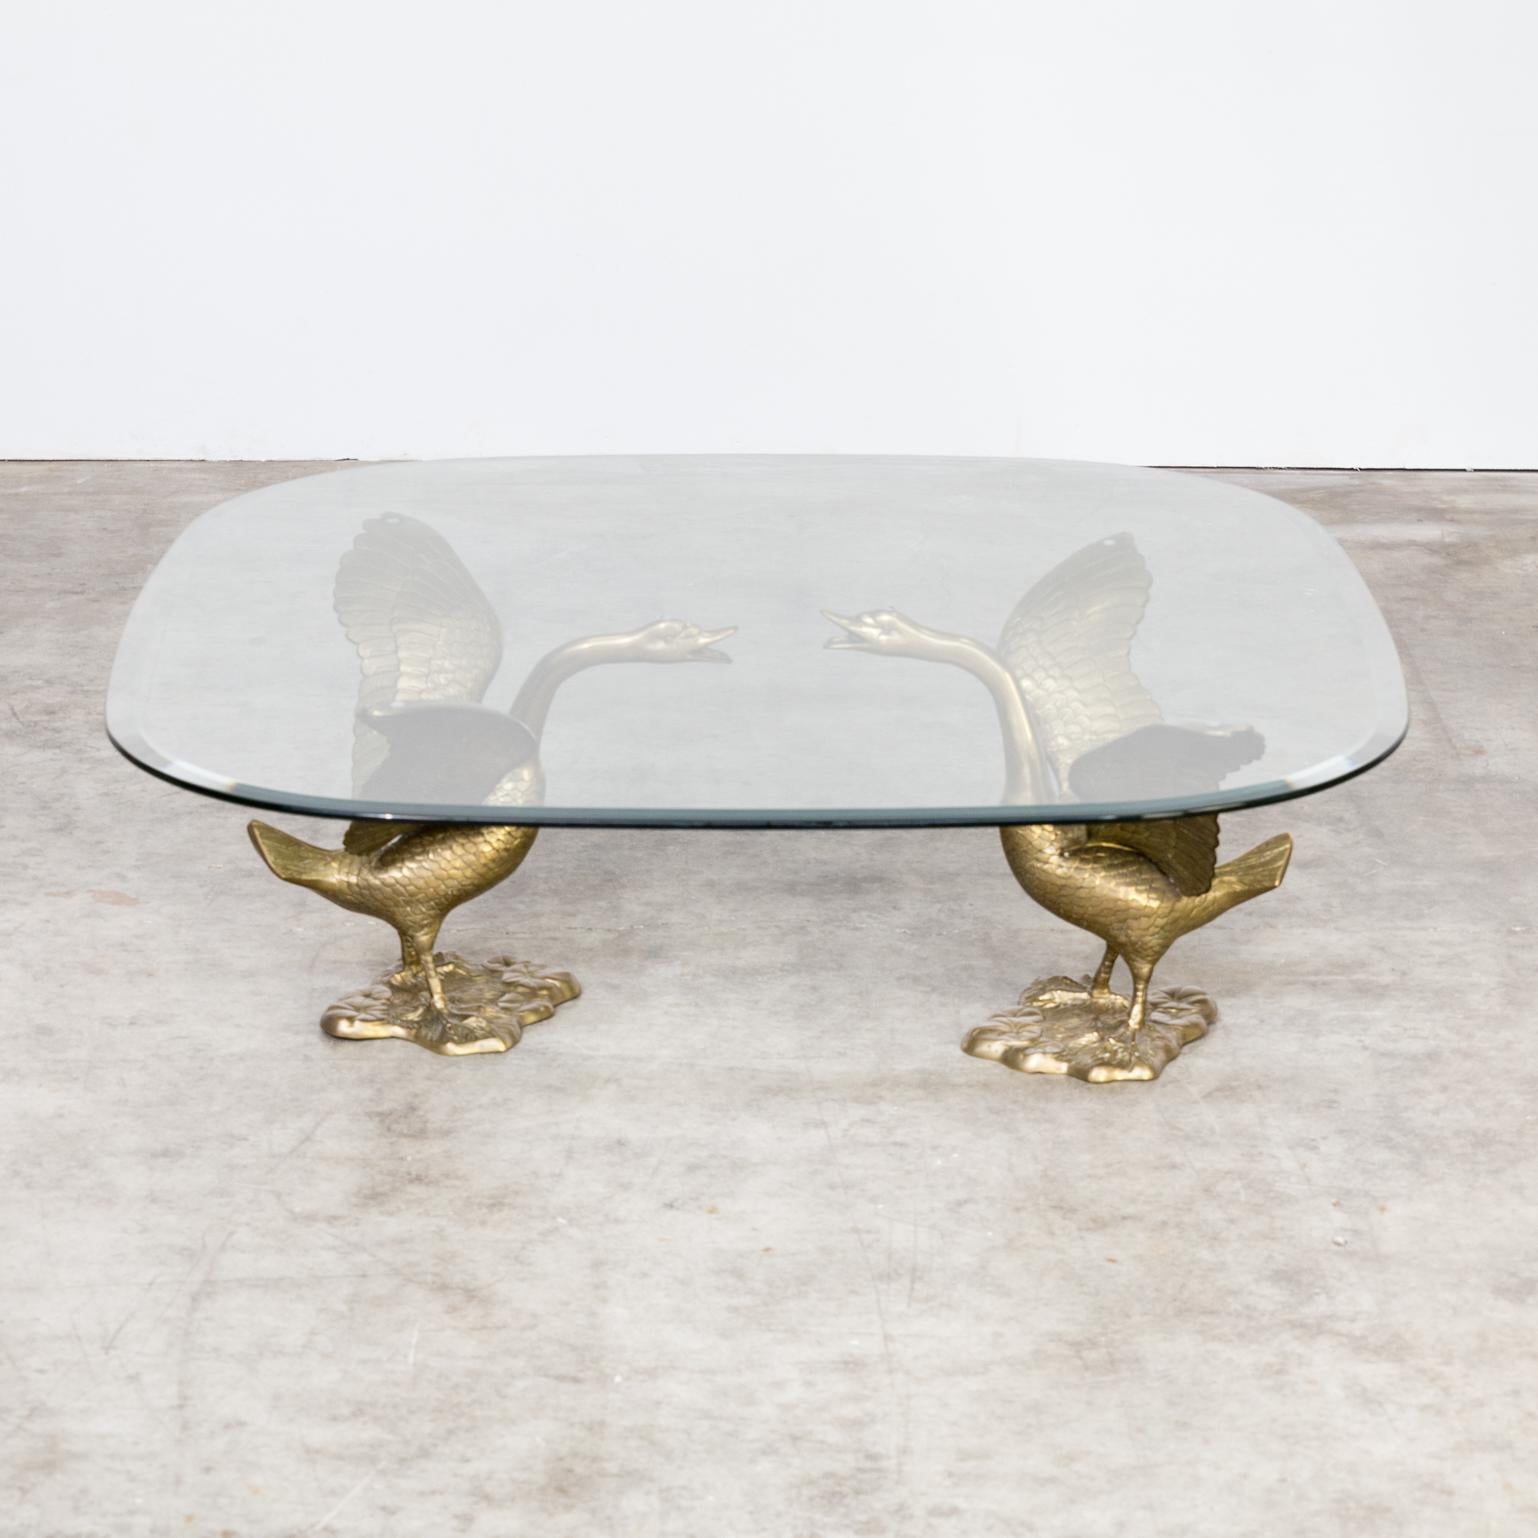 1970s Sculptural ‘goose’ Coffee Table with Glass Table Top In Good Condition For Sale In Amstelveen, Noord